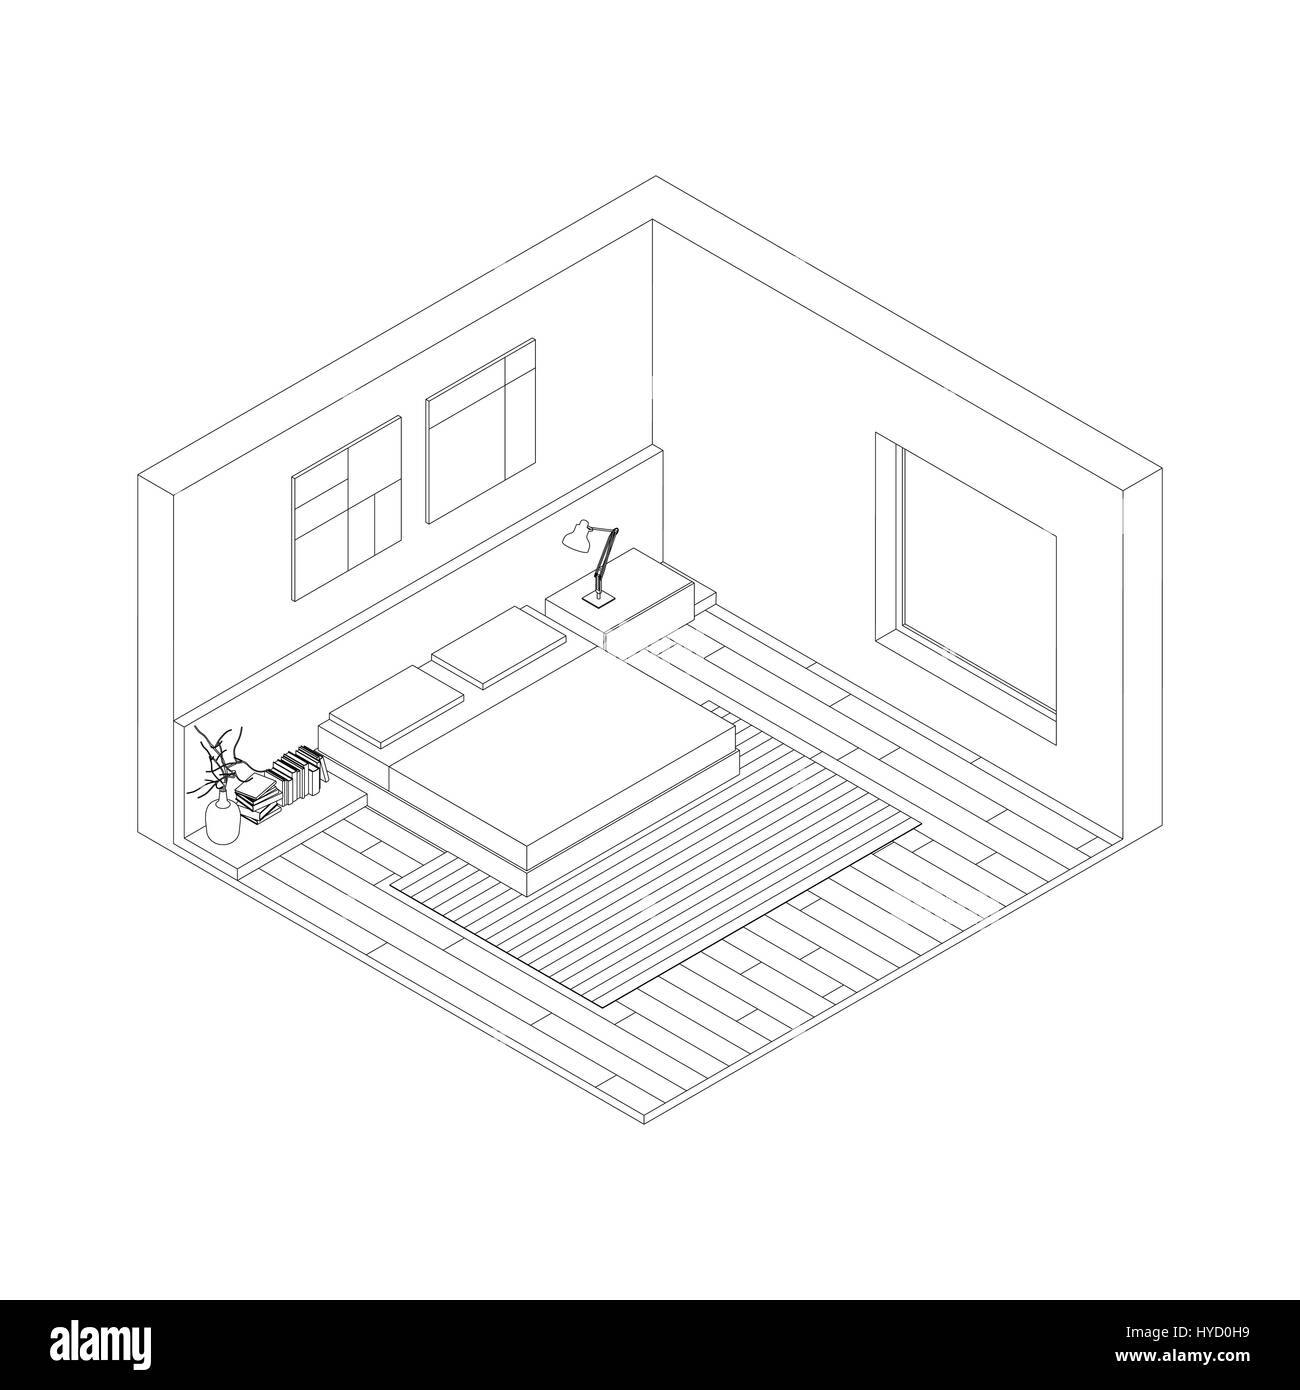 Line Drawing Of The Interior Of Bedroom Isometric View Stock